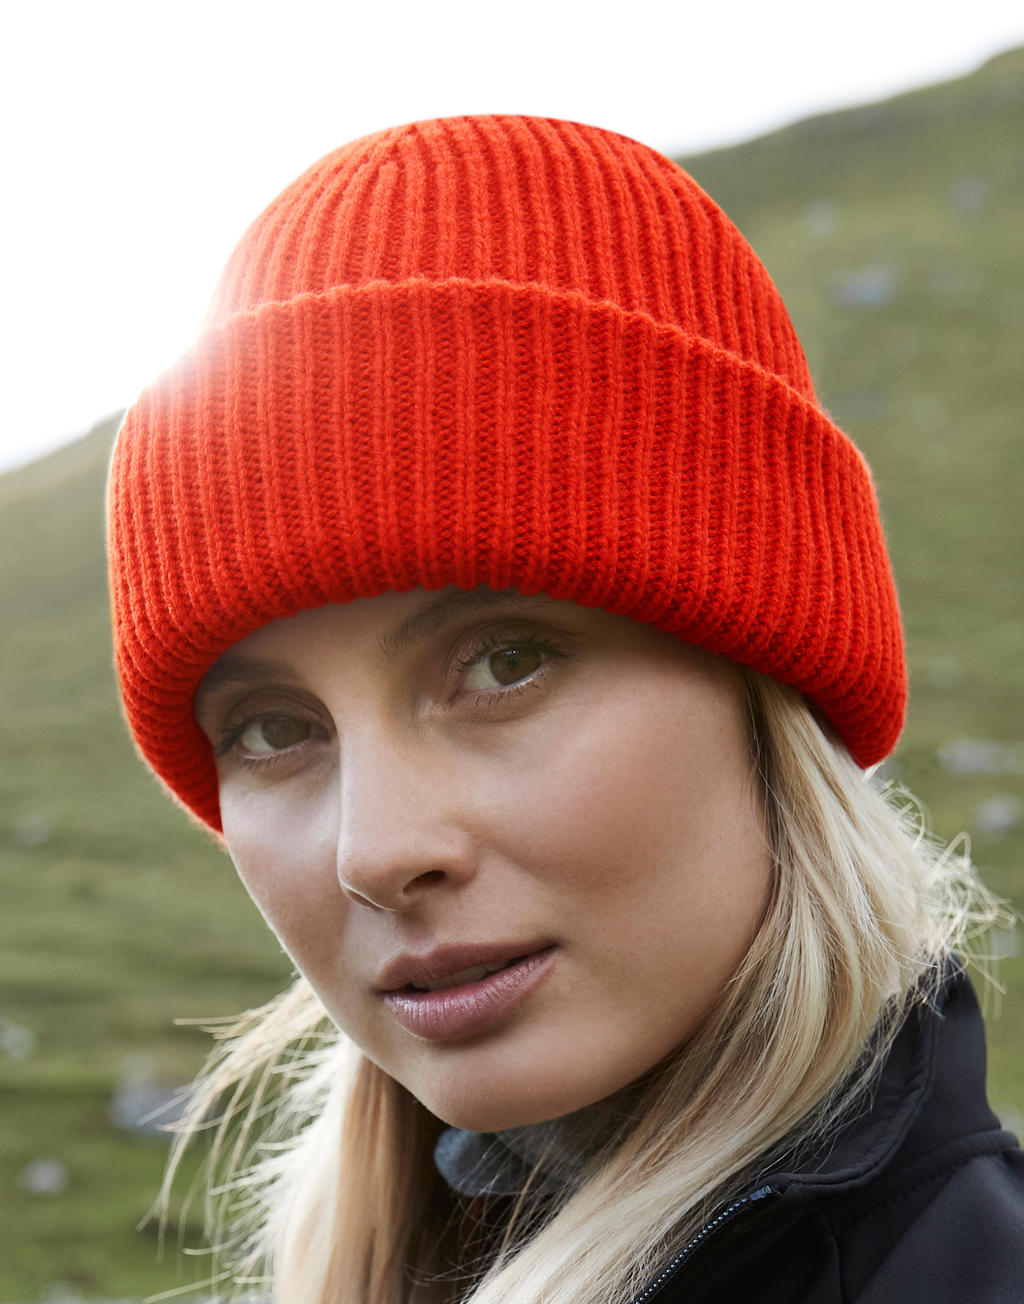  Wind Resistant Breathable Elements Beanie in Farbe Black